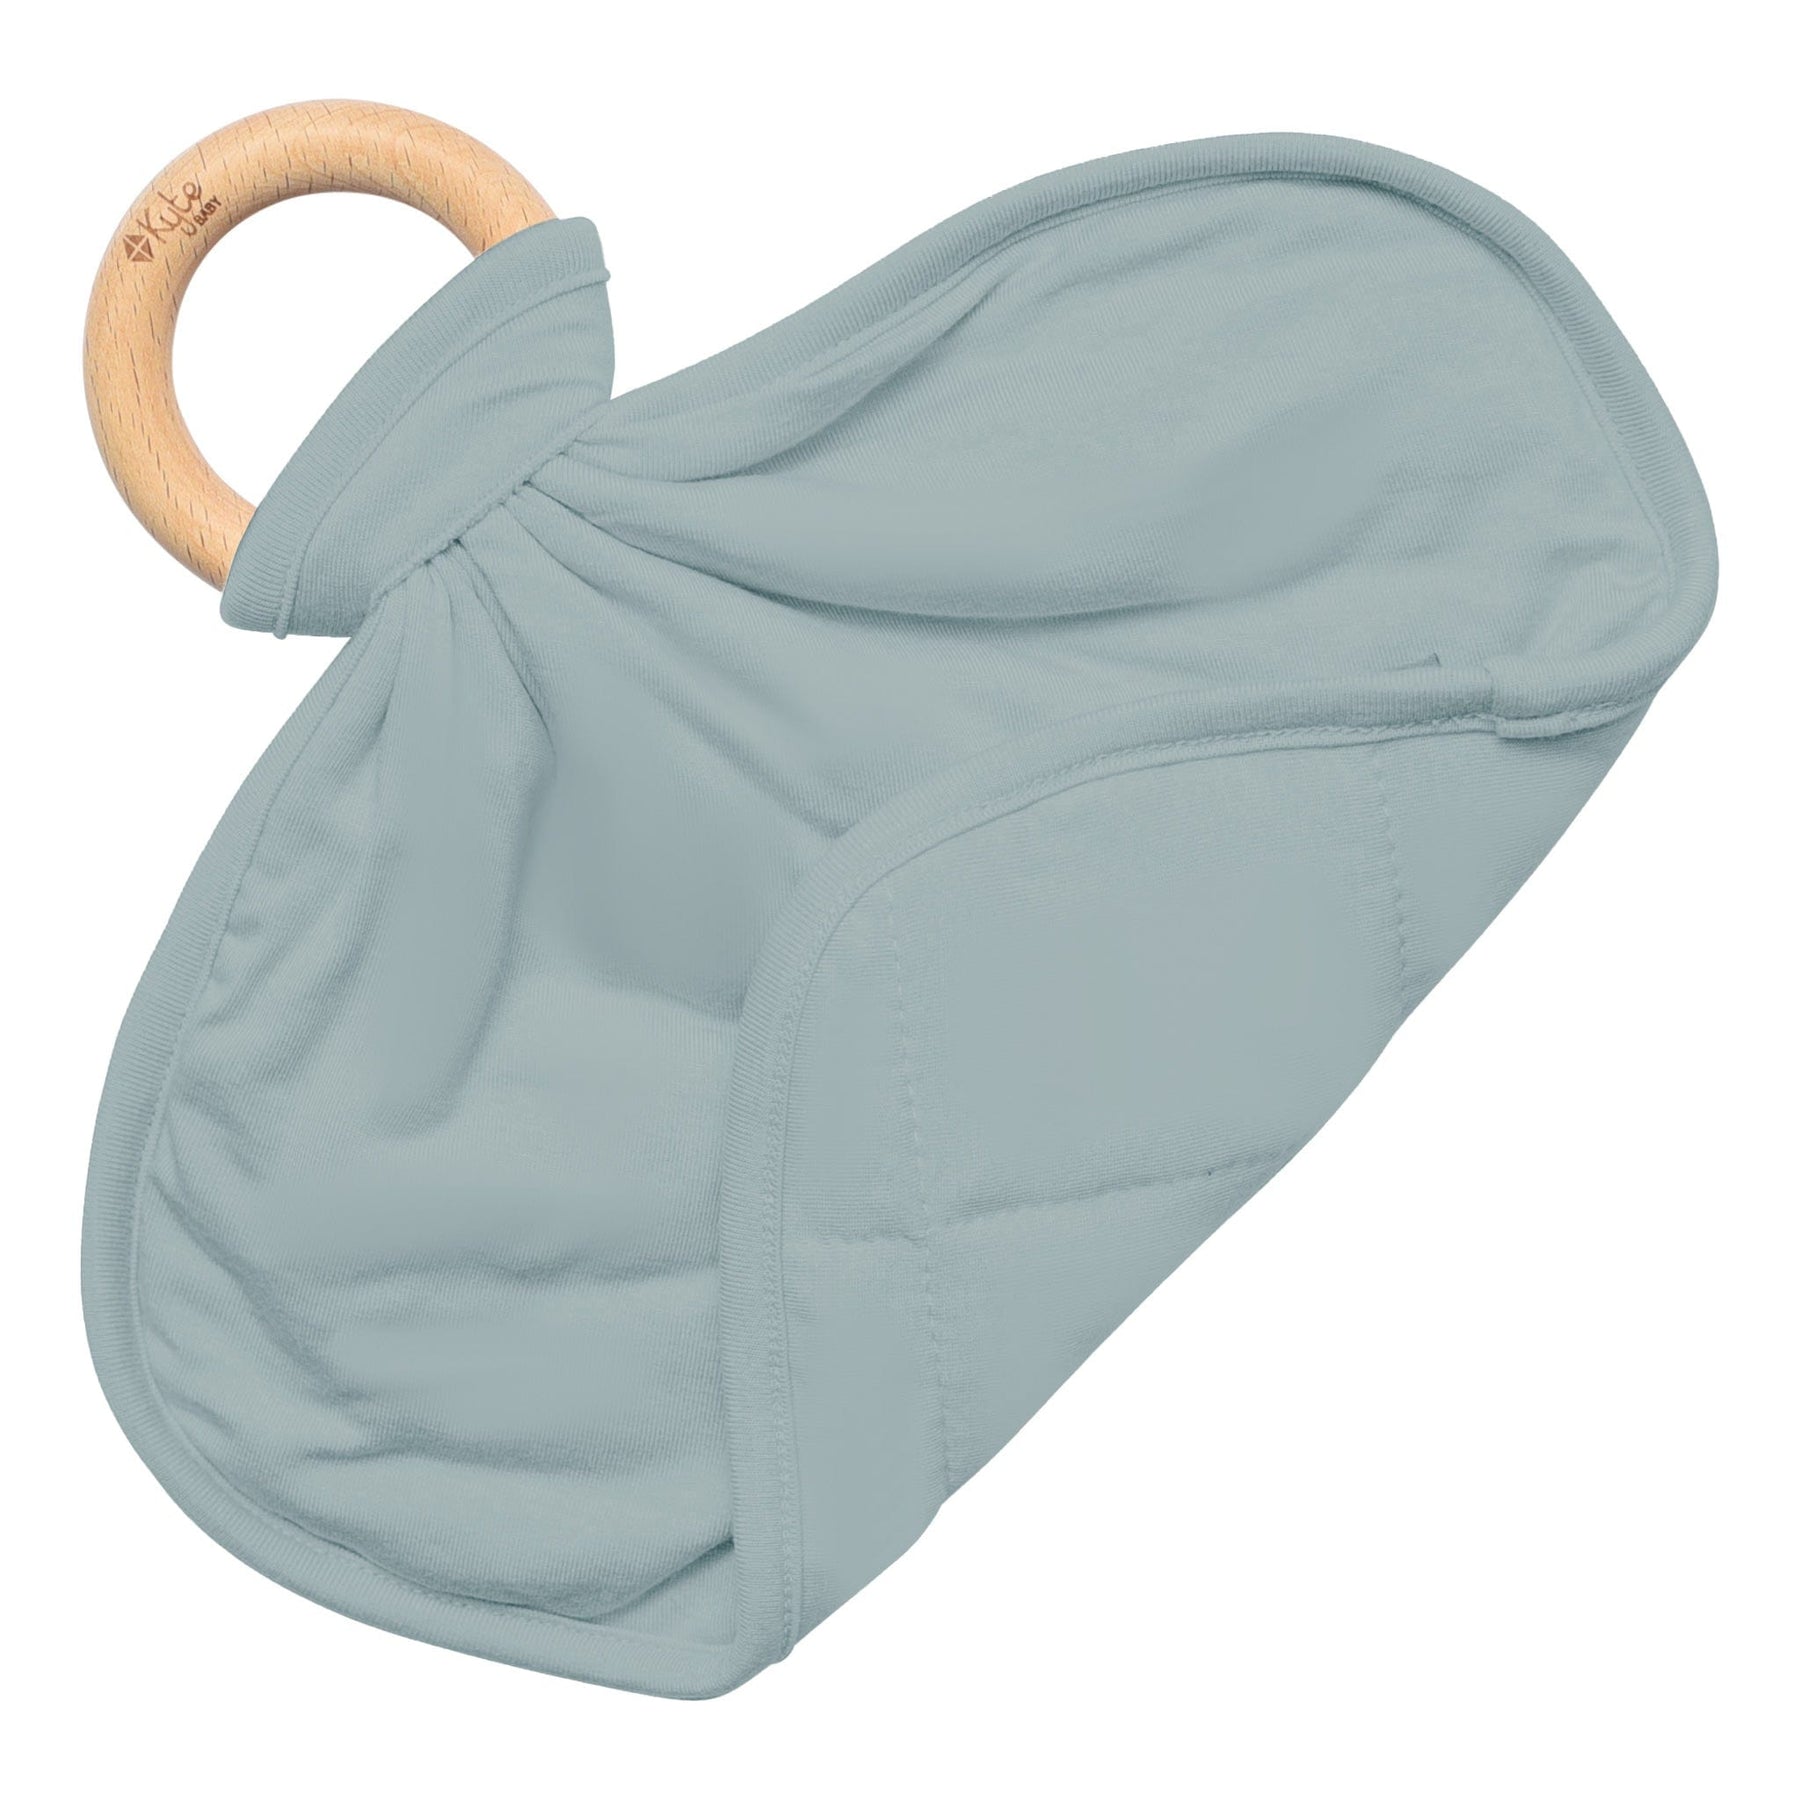 Kyte Baby Lovey Glacier / Infant Lovey in Glacier with Removable Teething Ring